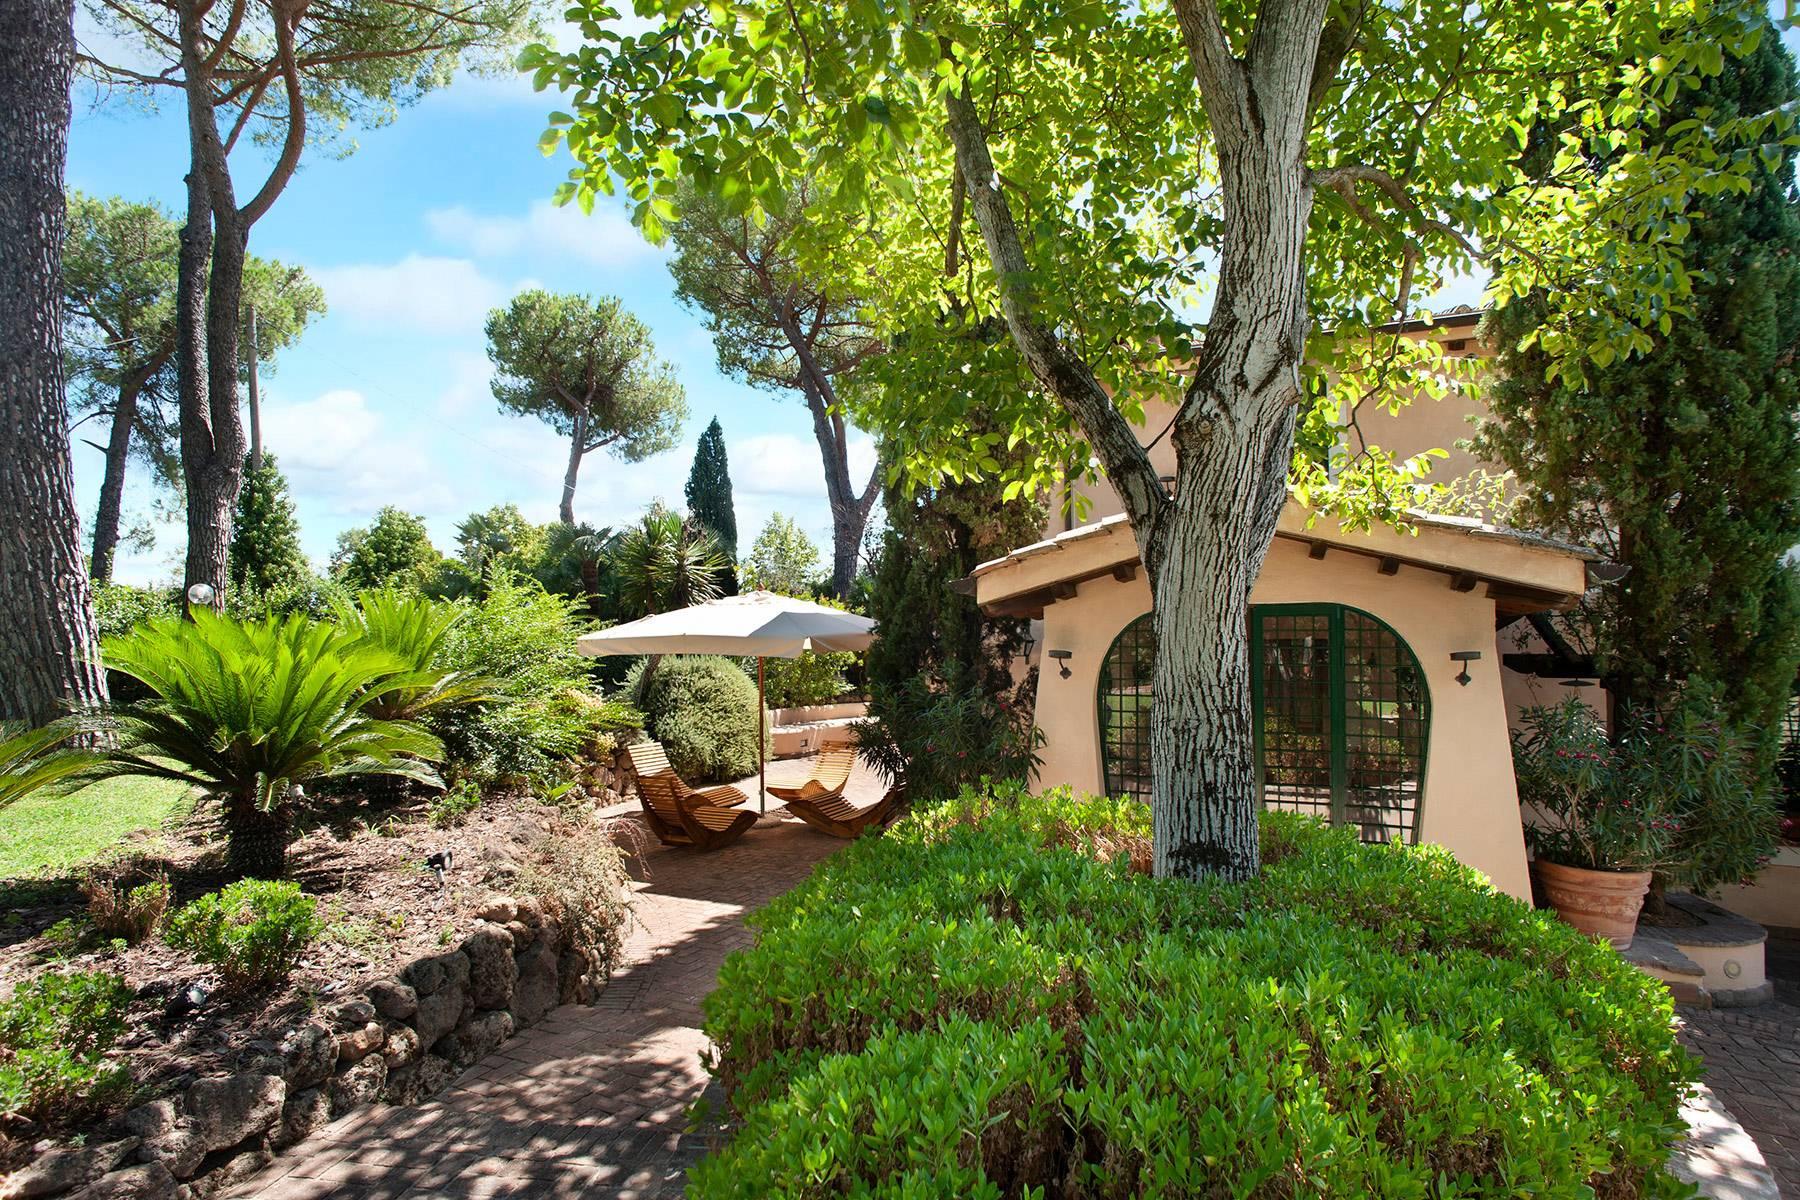 Villa Nayara - Lovely mansion with swimming pool 30 minutes from Rome - 10